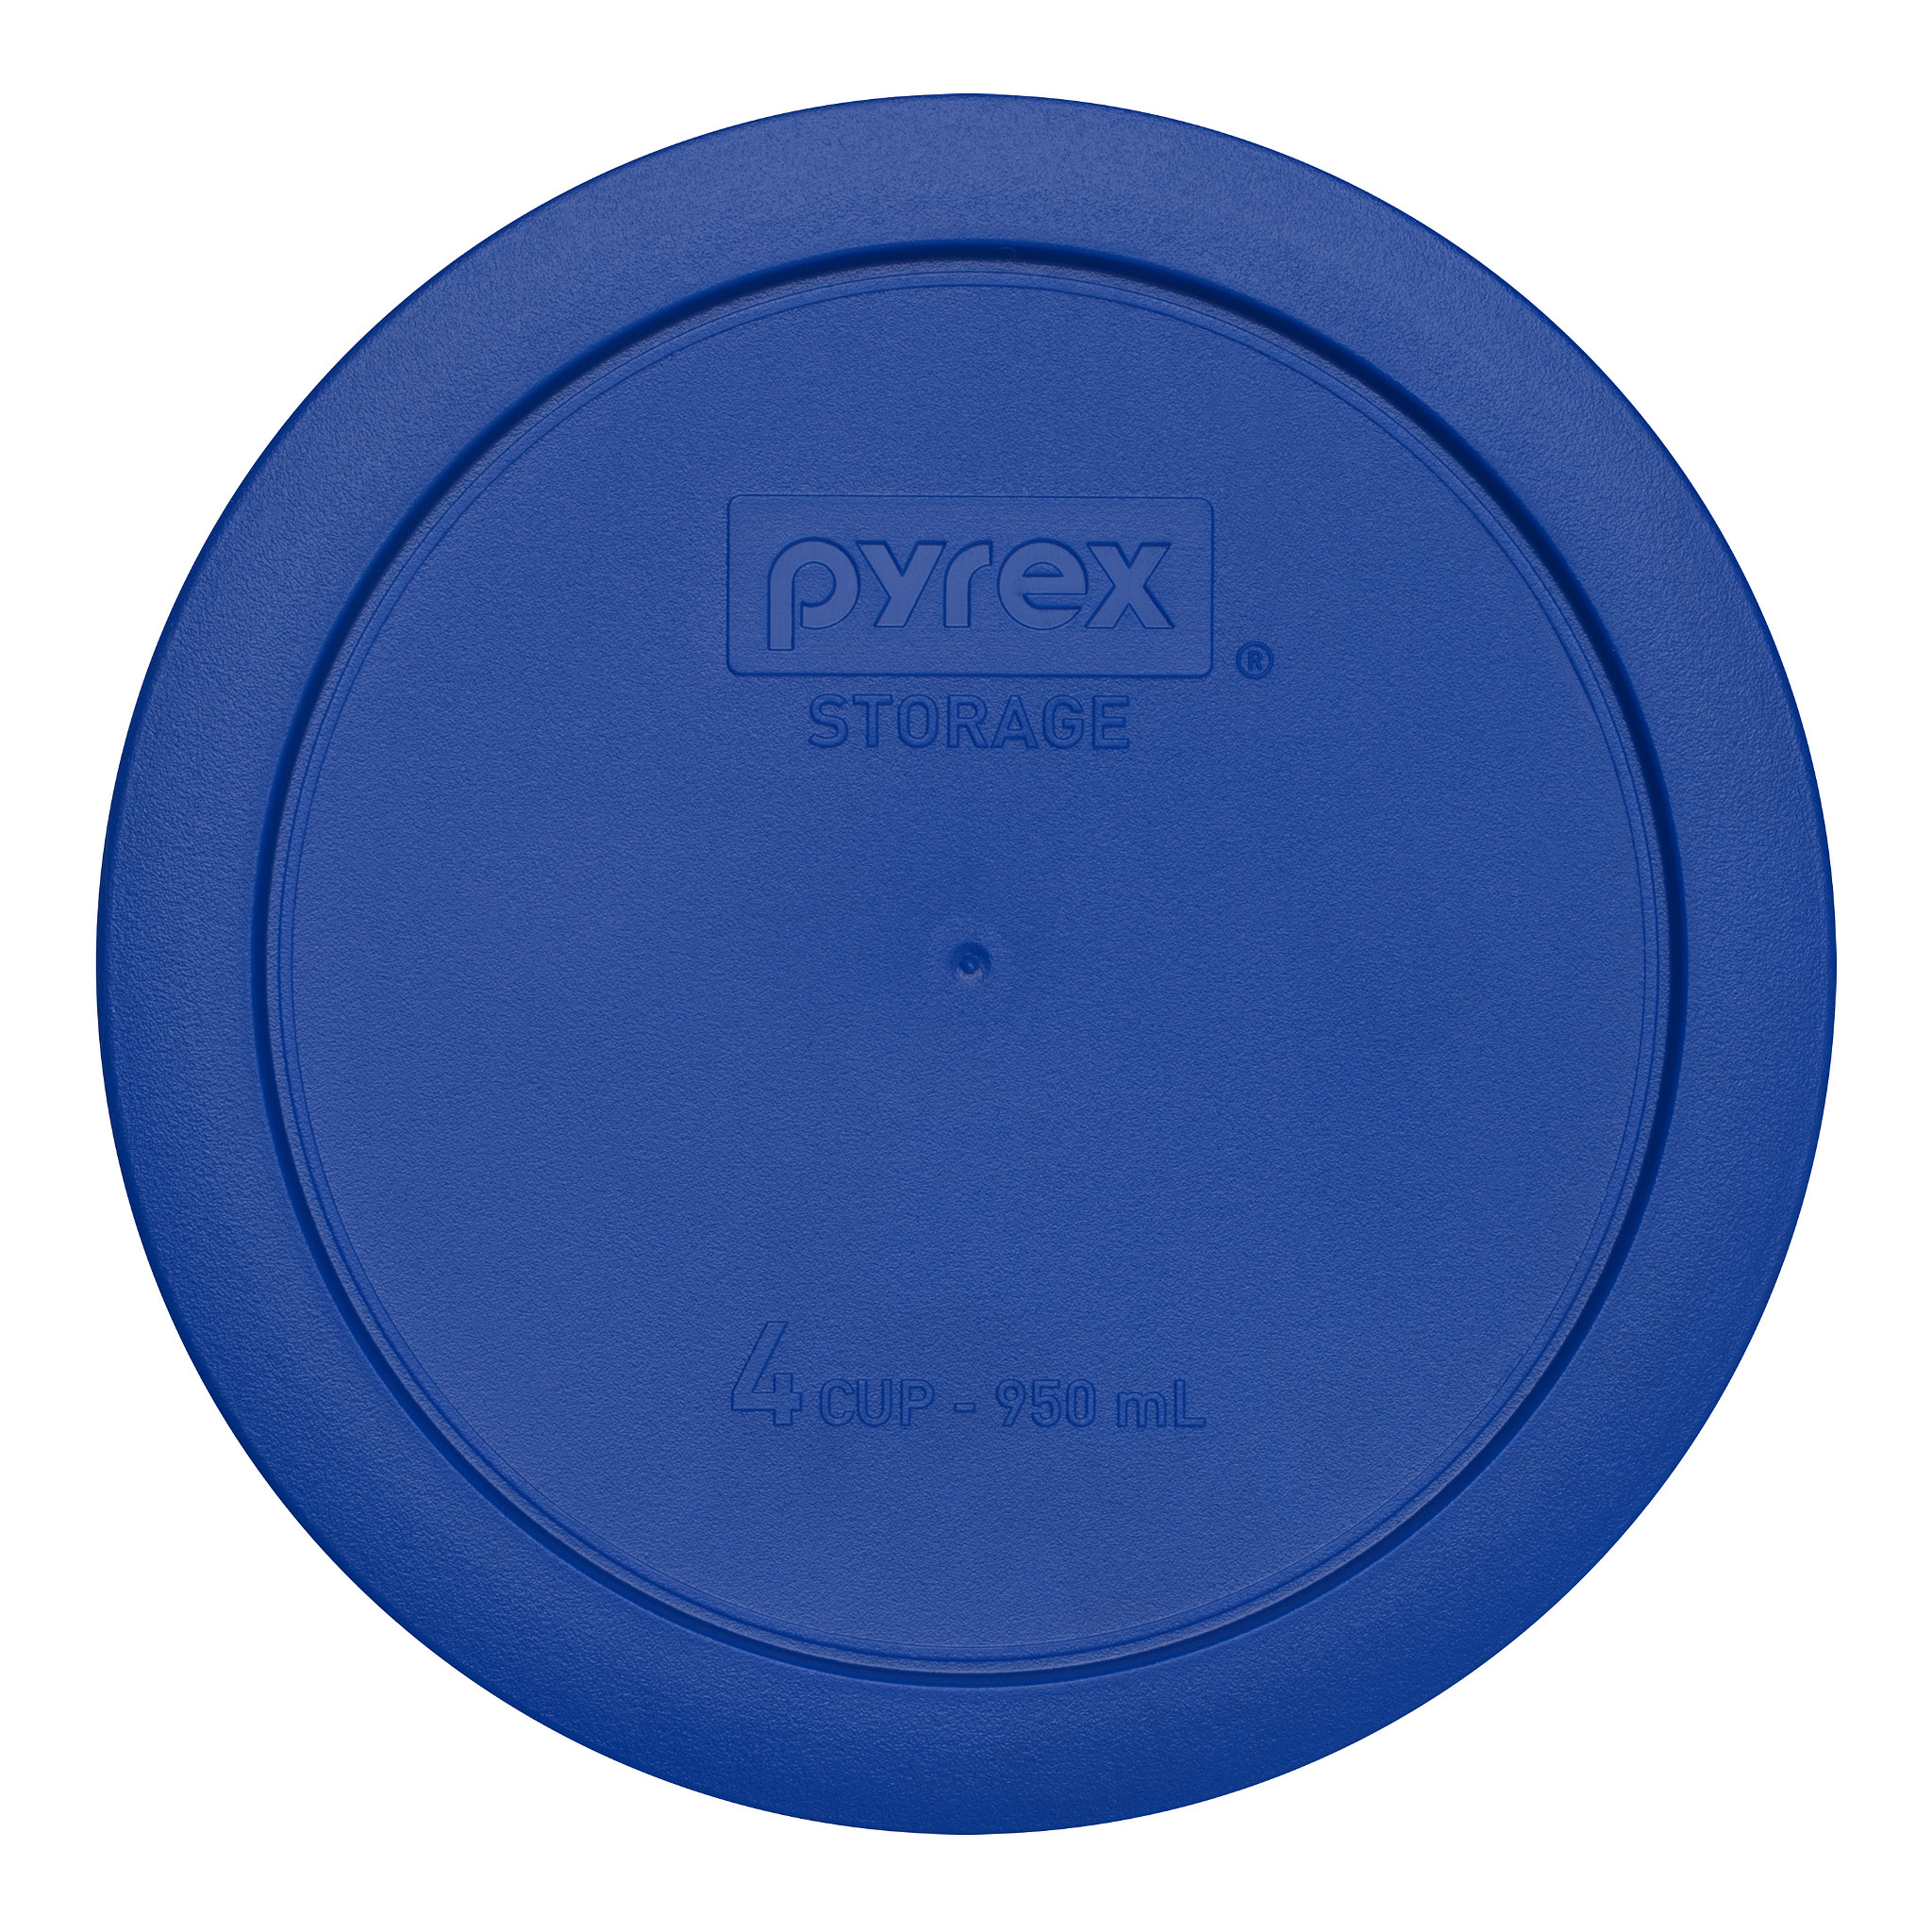 https://embed.widencdn.net/img/worldkitchen/bcbqs94eut/2048px/1113767_PY_Storage_Silo_Square_Lid_4cup-Round-Royal-Blue.png